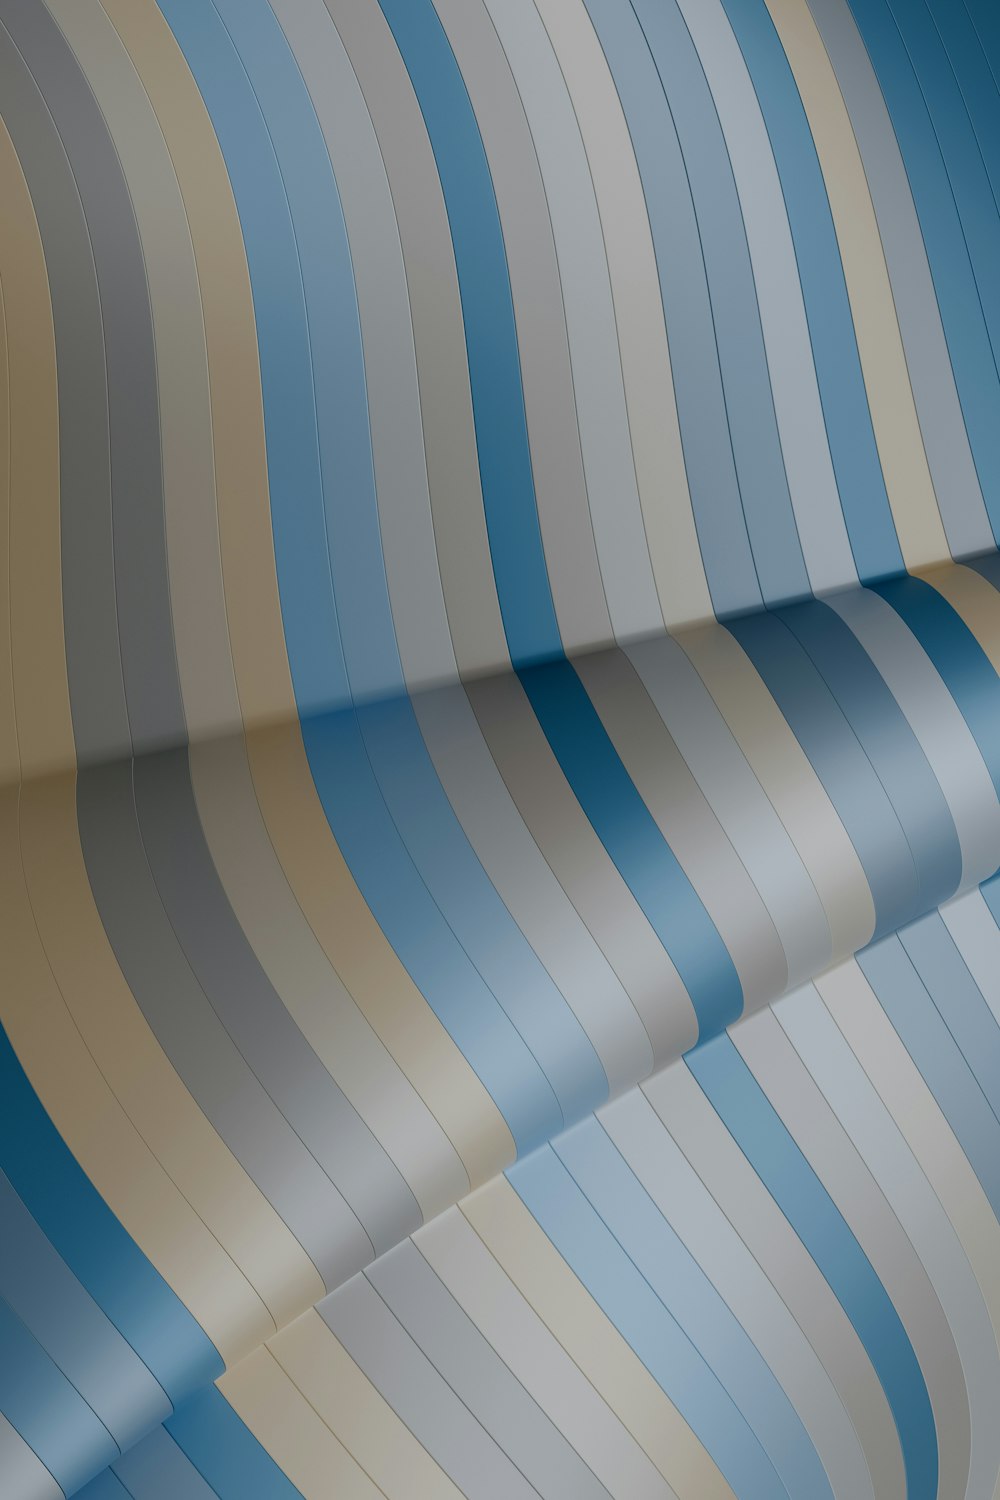 a close up of a blue and beige striped wallpaper